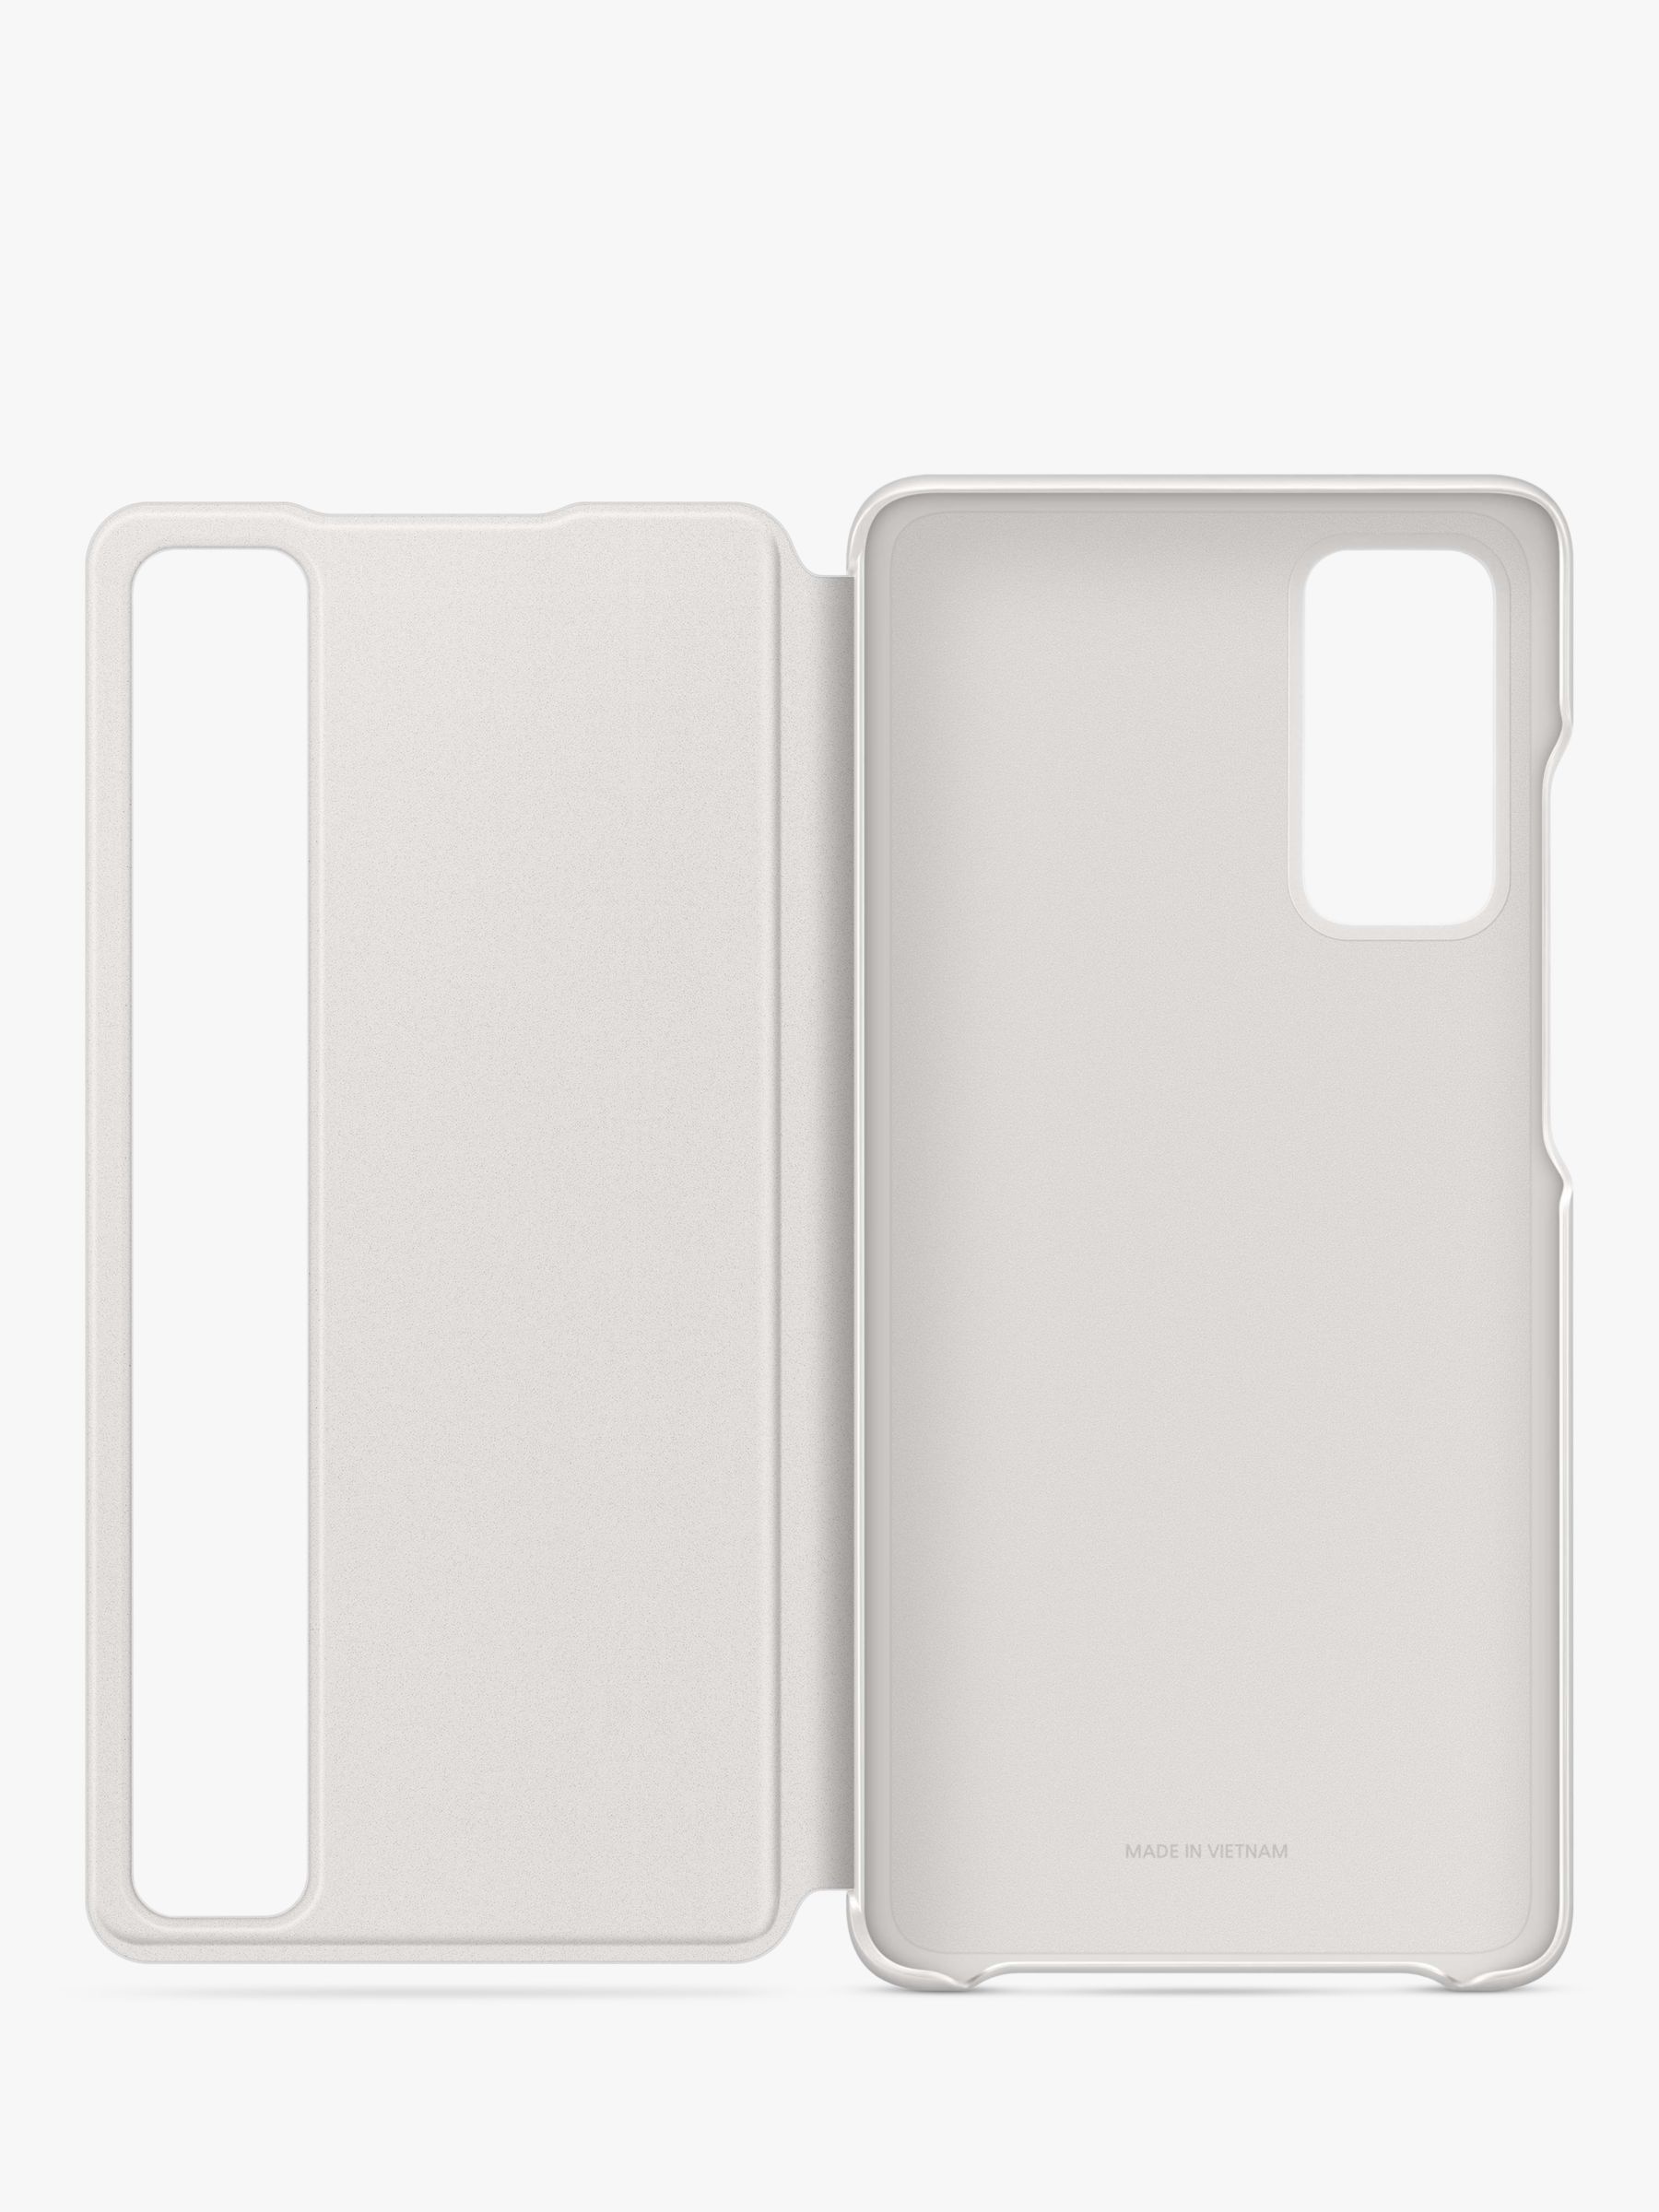 Samsung Galaxy S20 FE Clear View Case at John Lewis & Partners